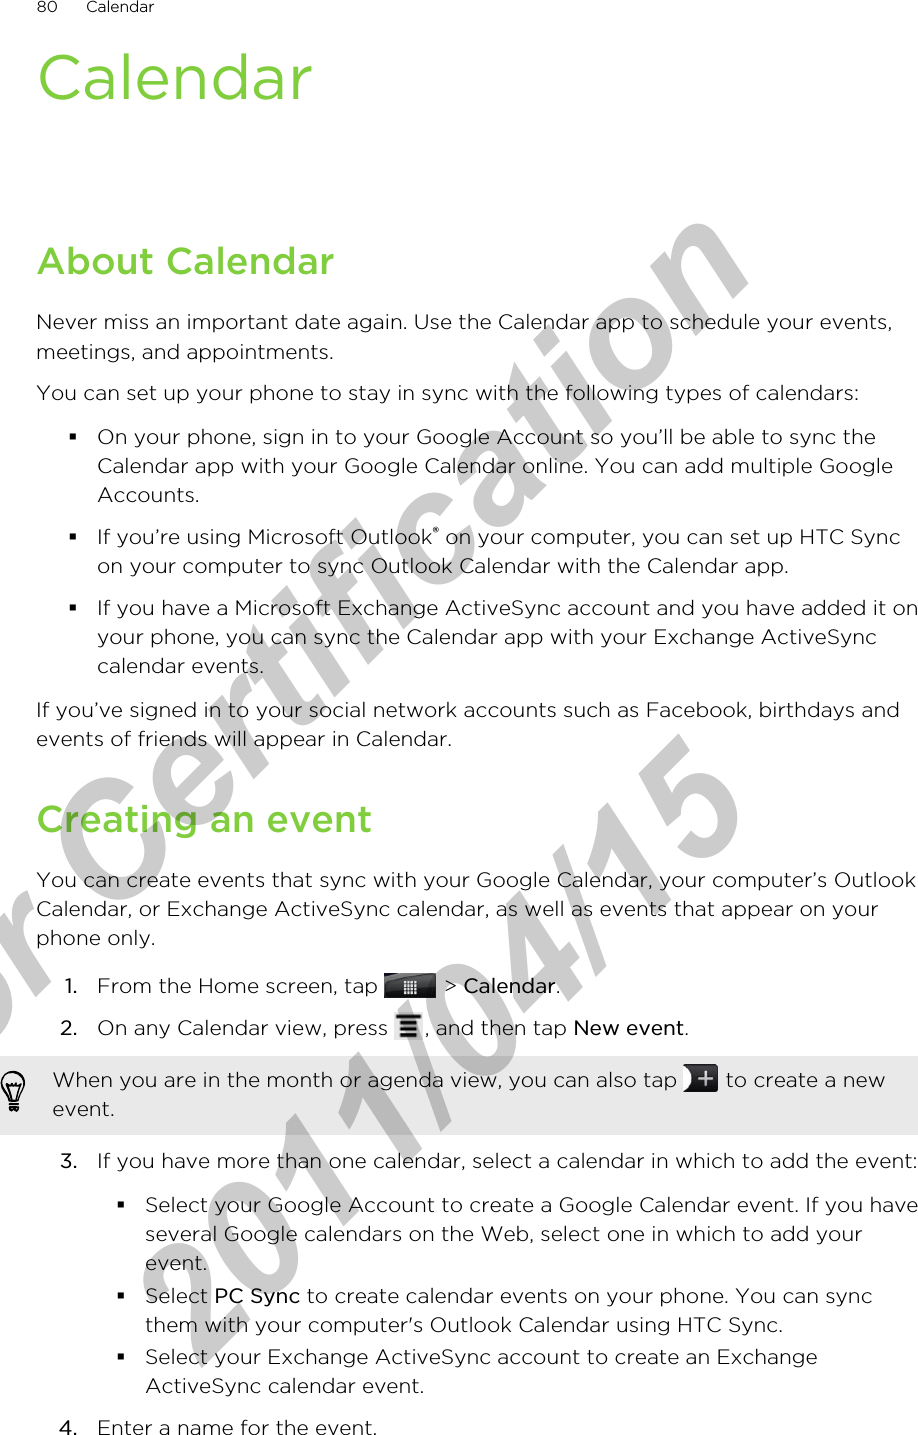 CalendarAbout CalendarNever miss an important date again. Use the Calendar app to schedule your events,meetings, and appointments.You can set up your phone to stay in sync with the following types of calendars:§On your phone, sign in to your Google Account so you’ll be able to sync theCalendar app with your Google Calendar online. You can add multiple GoogleAccounts.§If you’re using Microsoft Outlook® on your computer, you can set up HTC Syncon your computer to sync Outlook Calendar with the Calendar app.§If you have a Microsoft Exchange ActiveSync account and you have added it onyour phone, you can sync the Calendar app with your Exchange ActiveSynccalendar events.If you’ve signed in to your social network accounts such as Facebook, birthdays andevents of friends will appear in Calendar.Creating an eventYou can create events that sync with your Google Calendar, your computer’s OutlookCalendar, or Exchange ActiveSync calendar, as well as events that appear on yourphone only.1. From the Home screen, tap   &gt; Calendar.2. On any Calendar view, press  , and then tap New event. When you are in the month or agenda view, you can also tap   to create a newevent.3. If you have more than one calendar, select a calendar in which to add the event:§Select your Google Account to create a Google Calendar event. If you haveseveral Google calendars on the Web, select one in which to add yourevent.§Select PC Sync to create calendar events on your phone. You can syncthem with your computer&apos;s Outlook Calendar using HTC Sync.§Select your Exchange ActiveSync account to create an ExchangeActiveSync calendar event.4. Enter a name for the event.80 Calendarfor Certification  2011/04/15